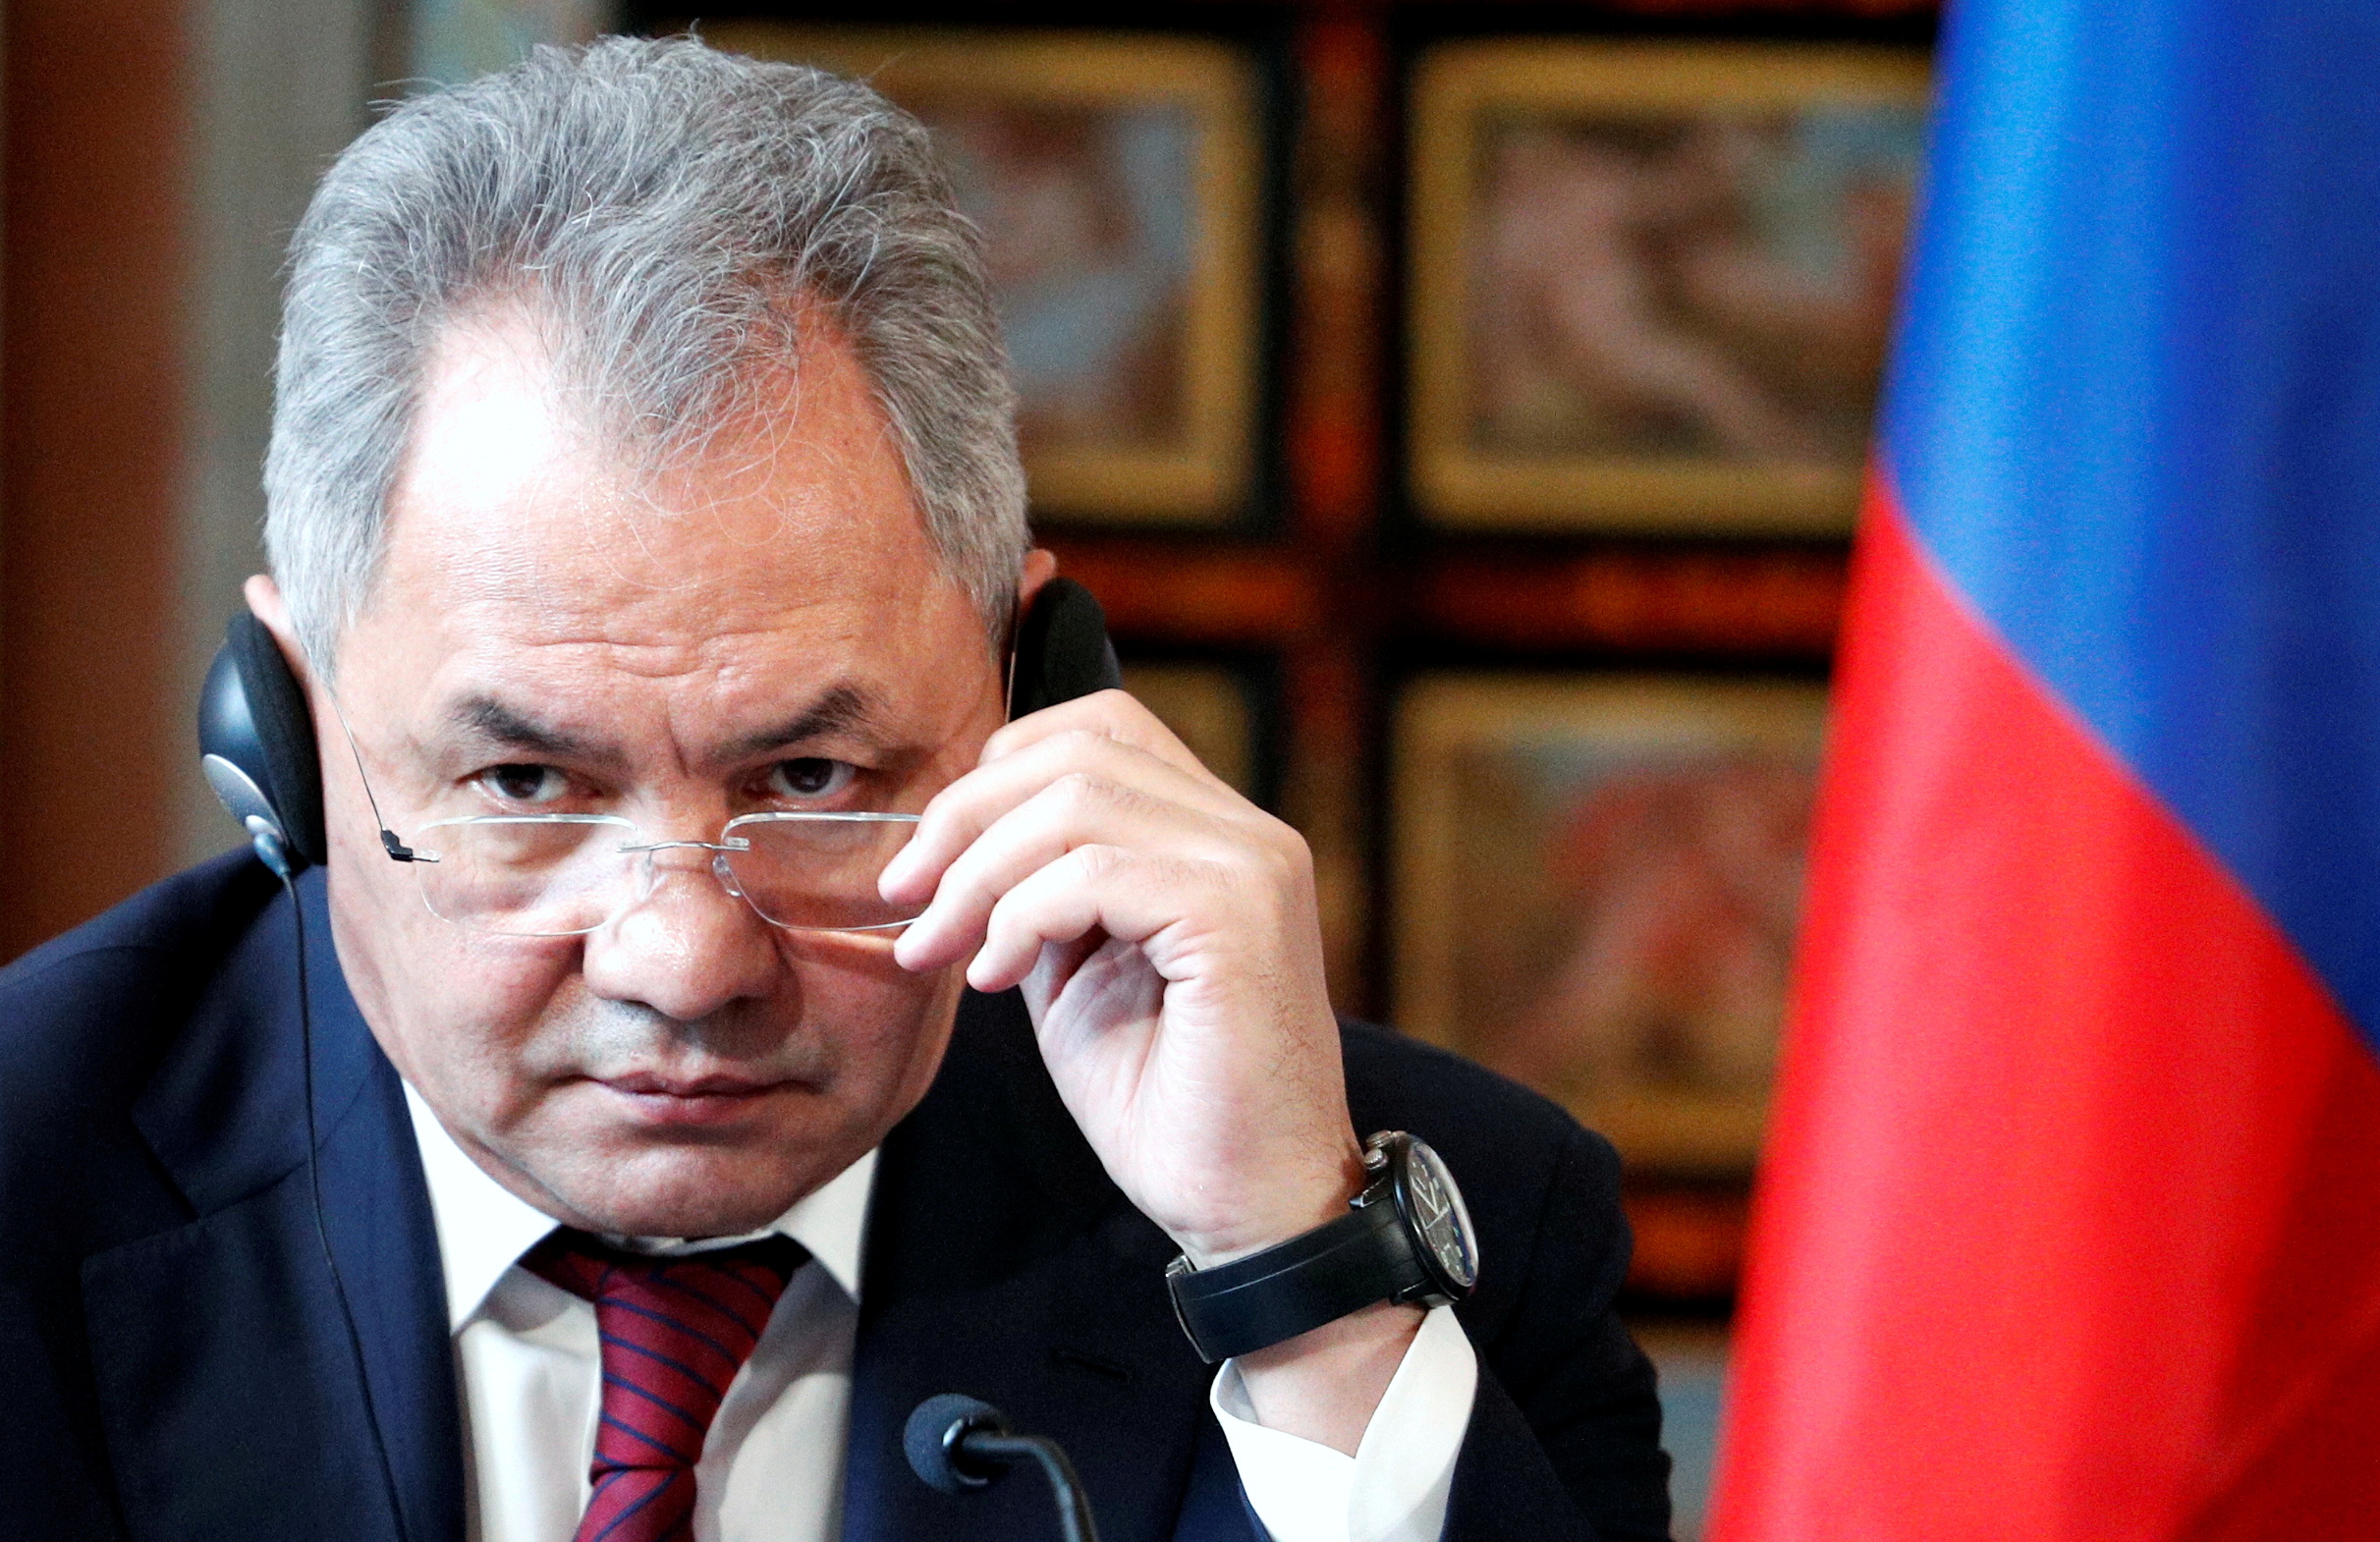 Russian Defence Minister Sergei Shoigu gestures during a news conference after talks between Italy and Russia in Rome